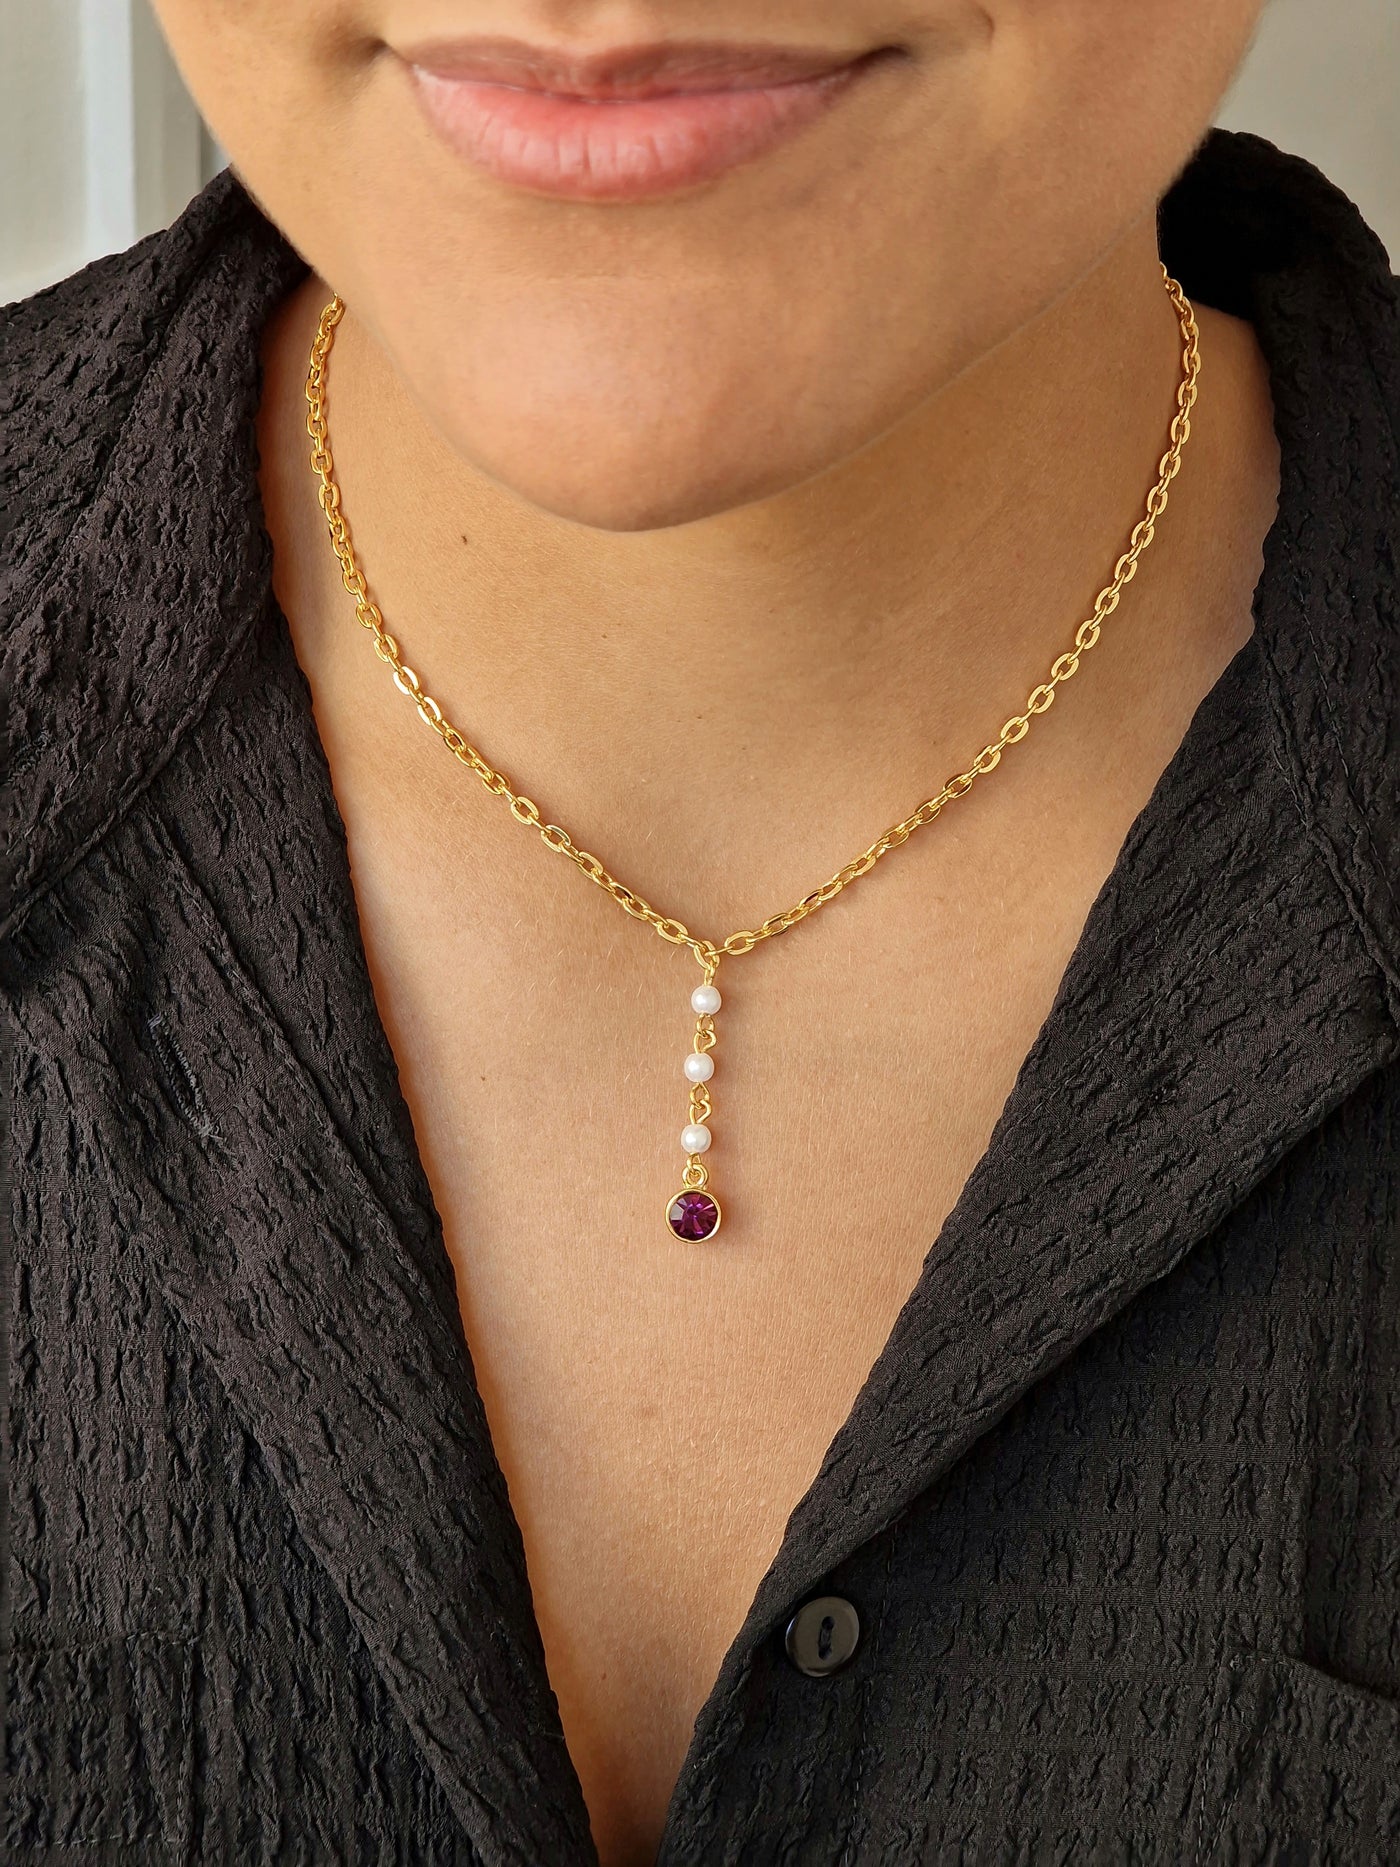 Vintage Gold Plated Cable Chain Pendant Necklace with a Purple Crystal and Pearl Charm